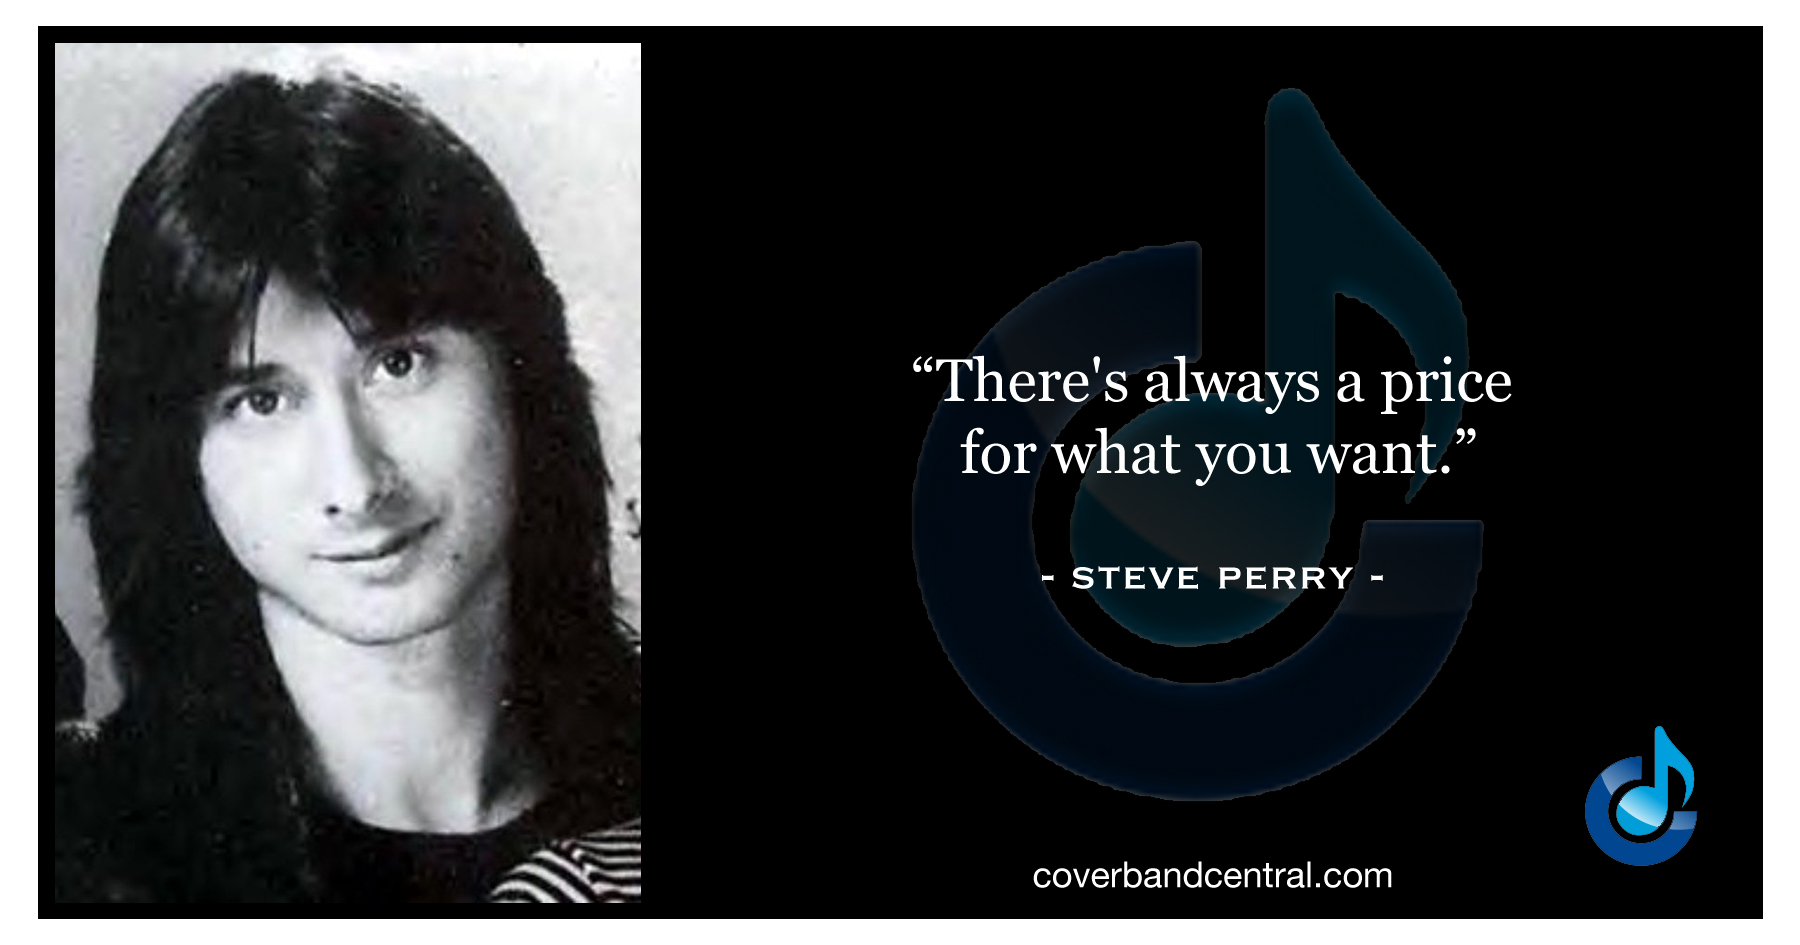 Steve Perry quote